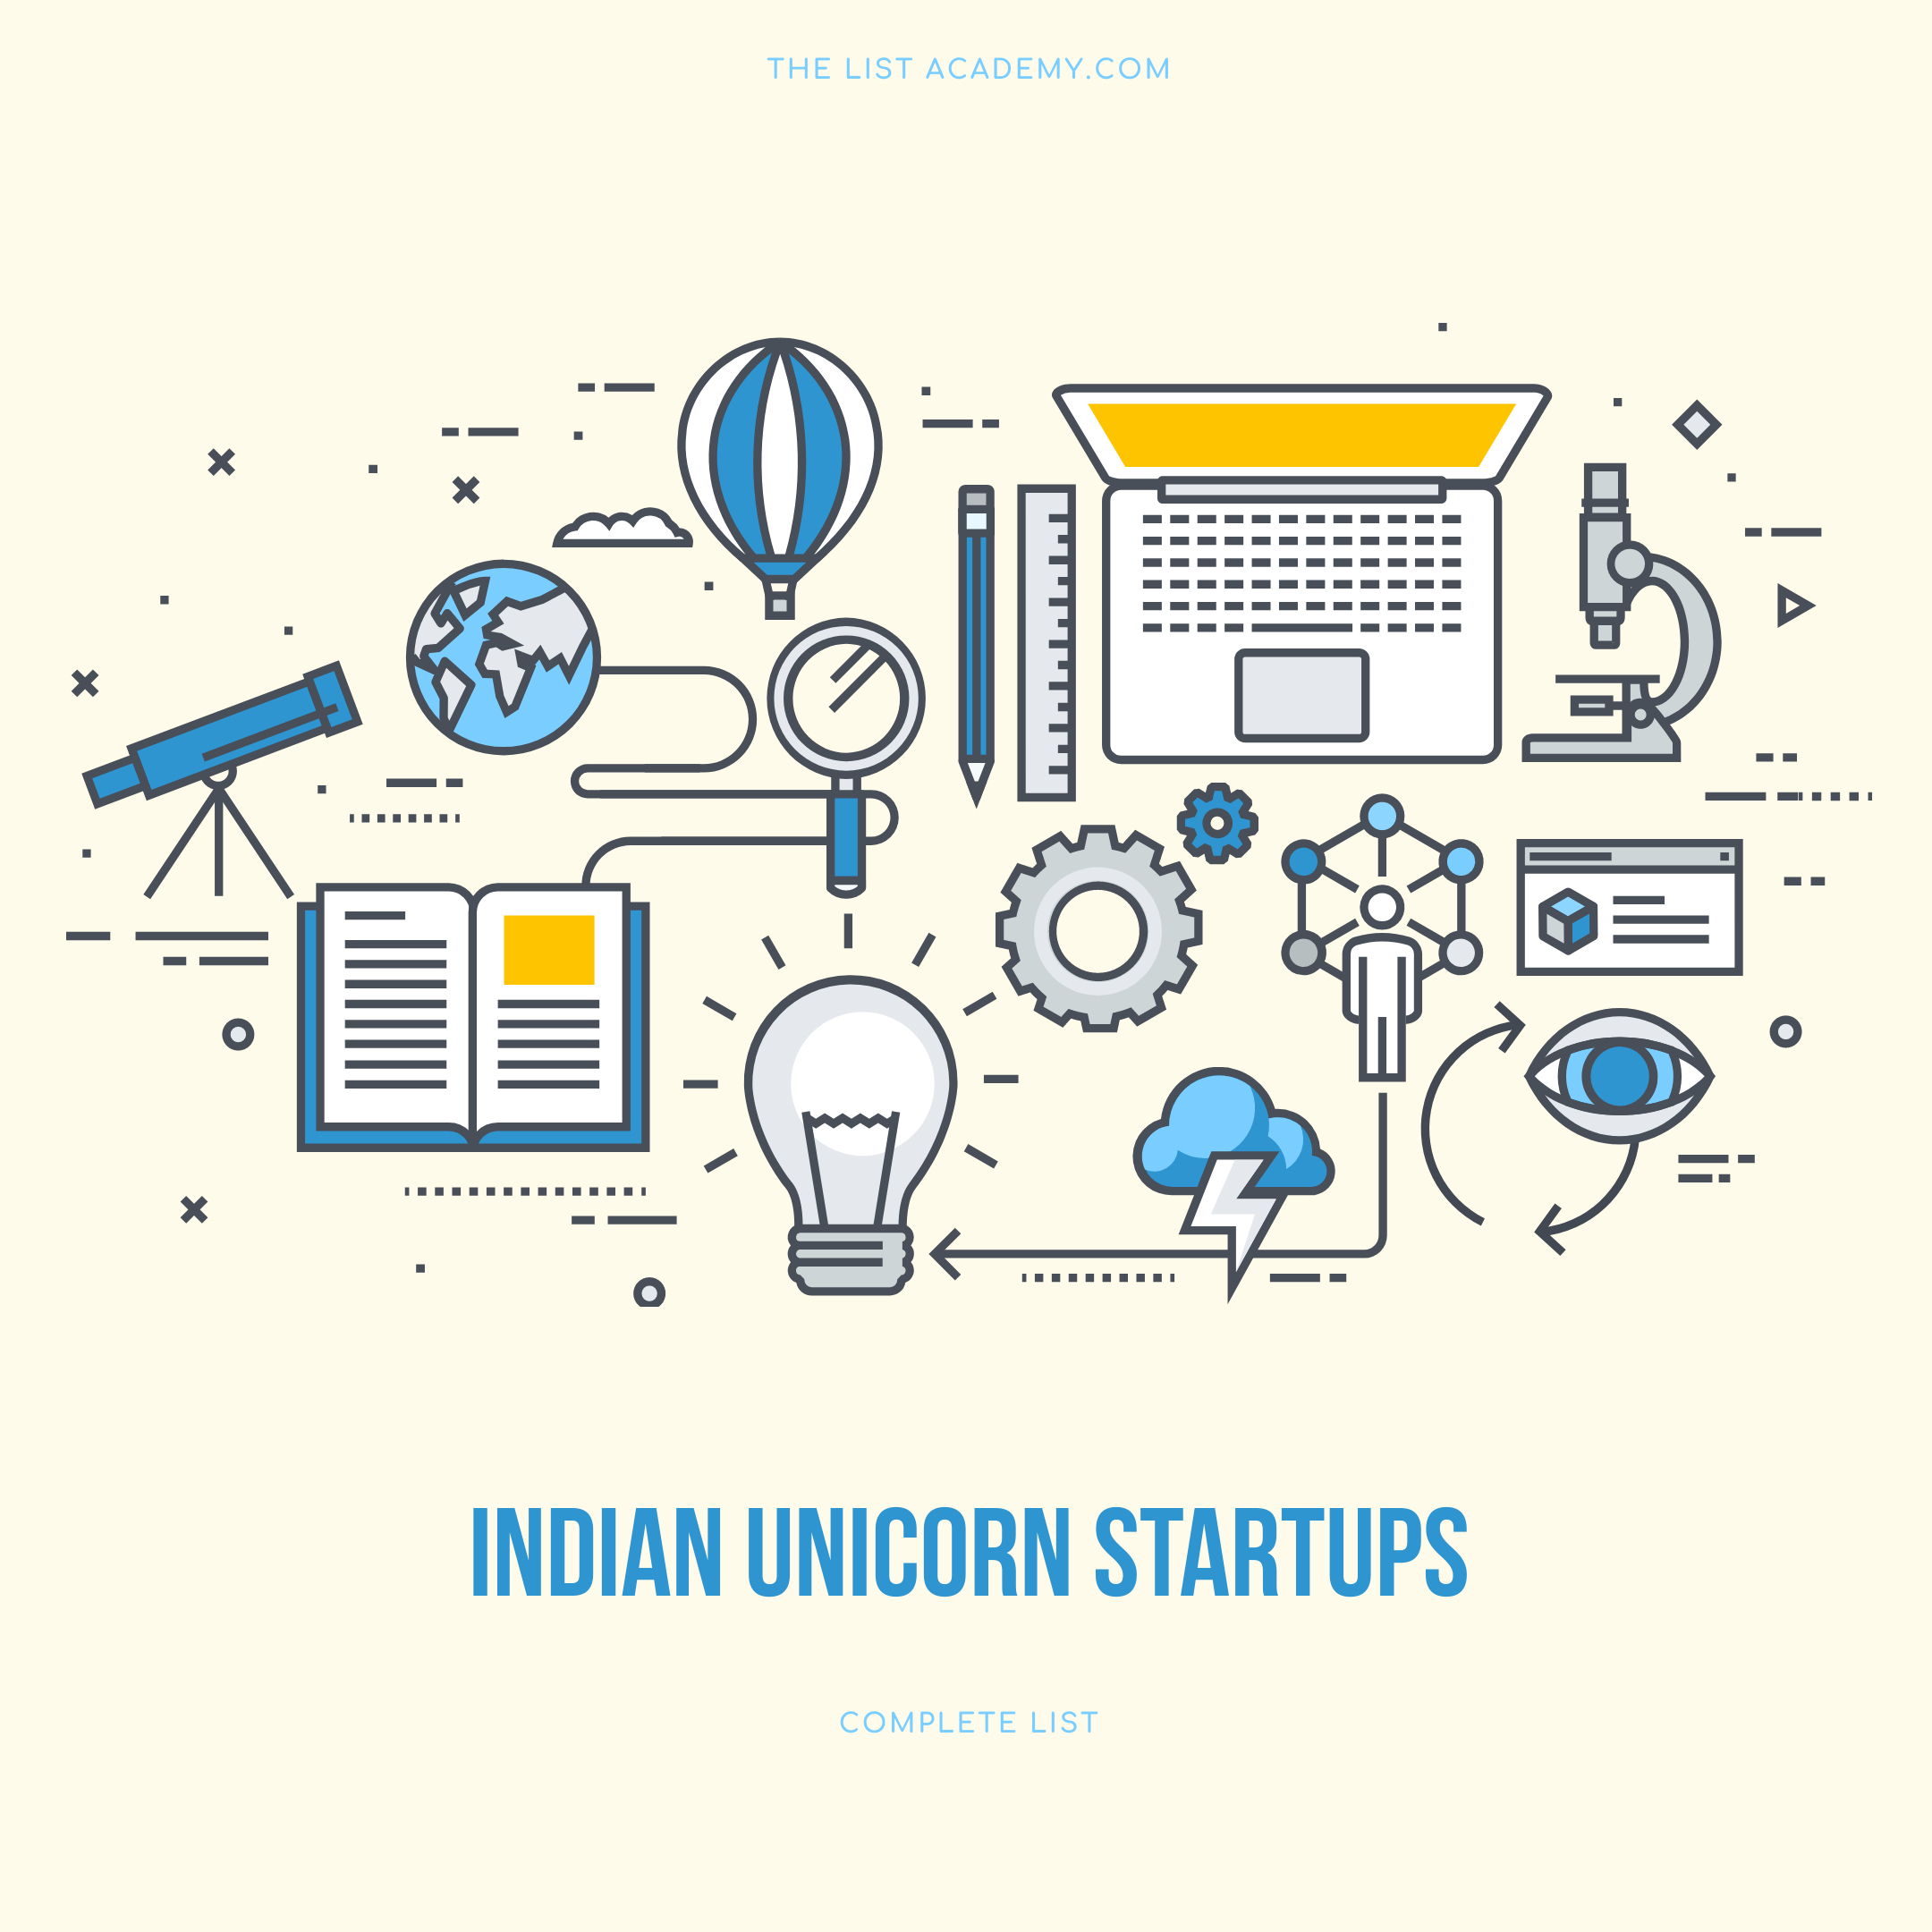 Cover Image For List : 114 Unicorn Startups In India | Indian Unicorn Startups